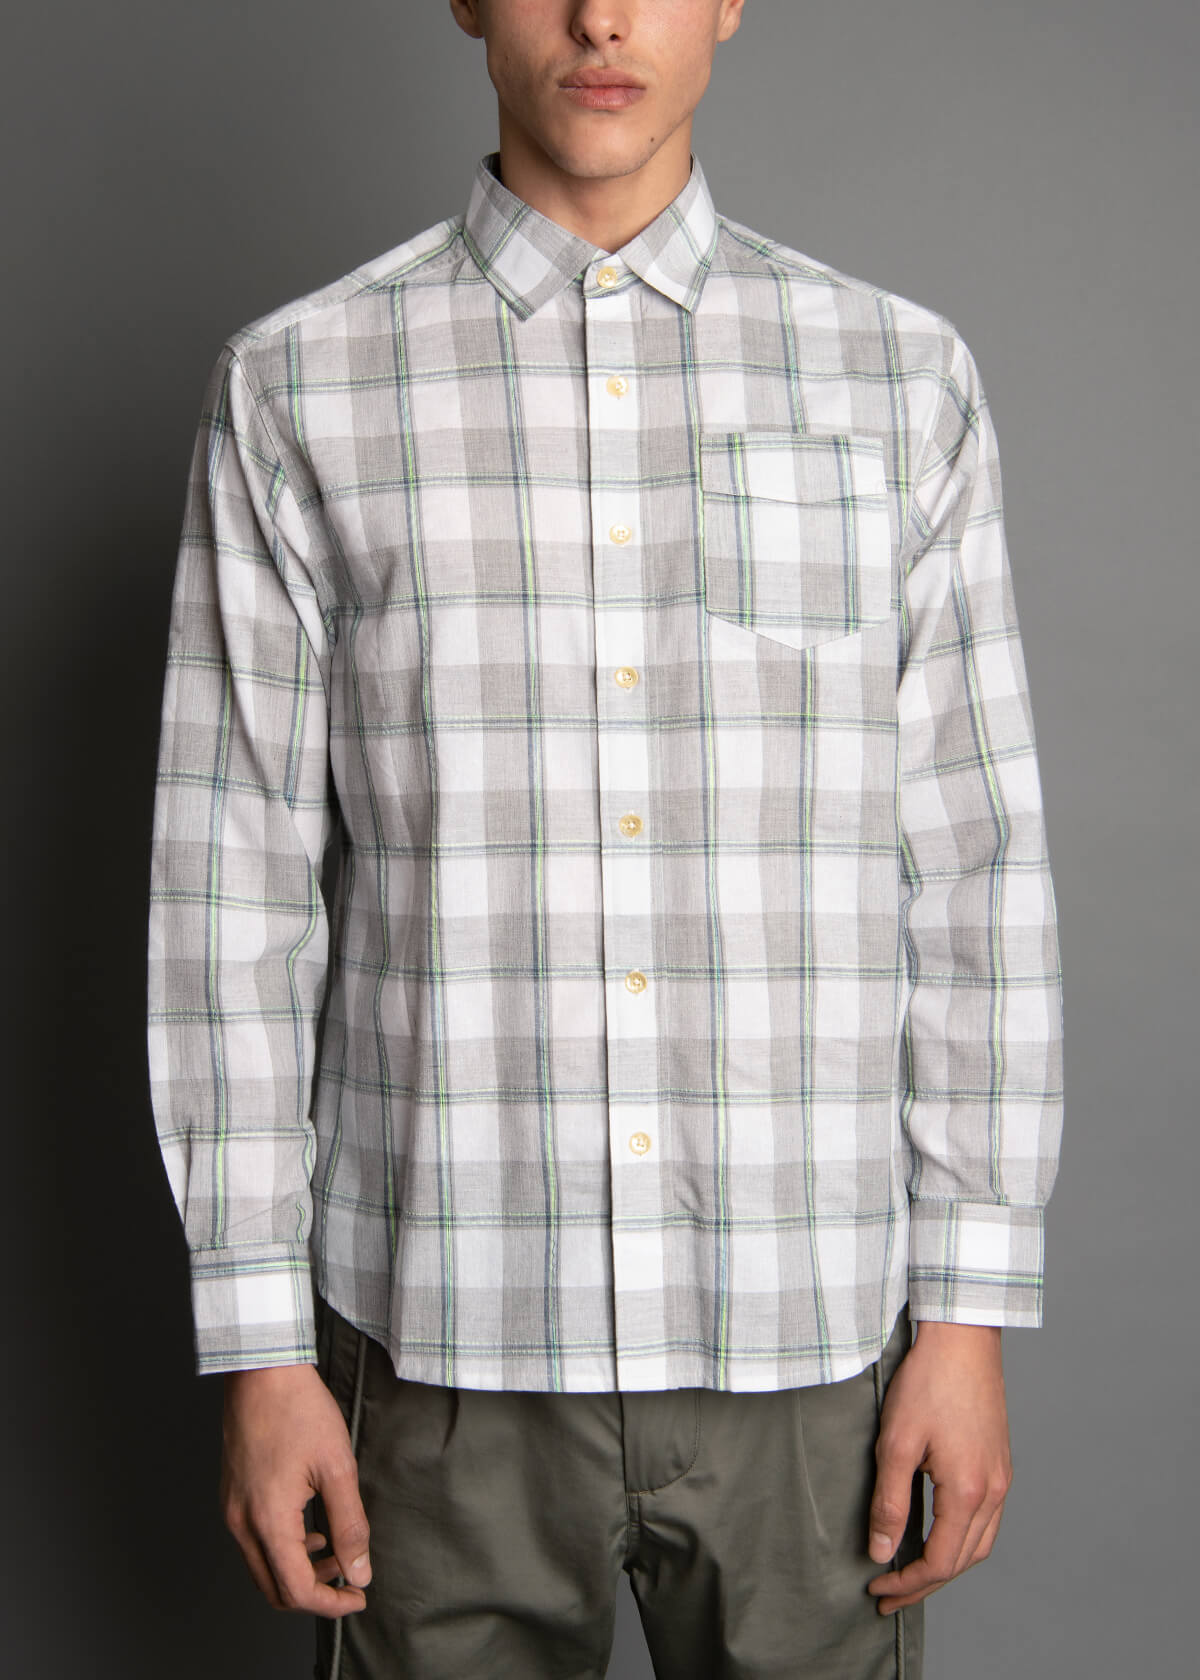 2 toned grey relaxed fit mens shirt